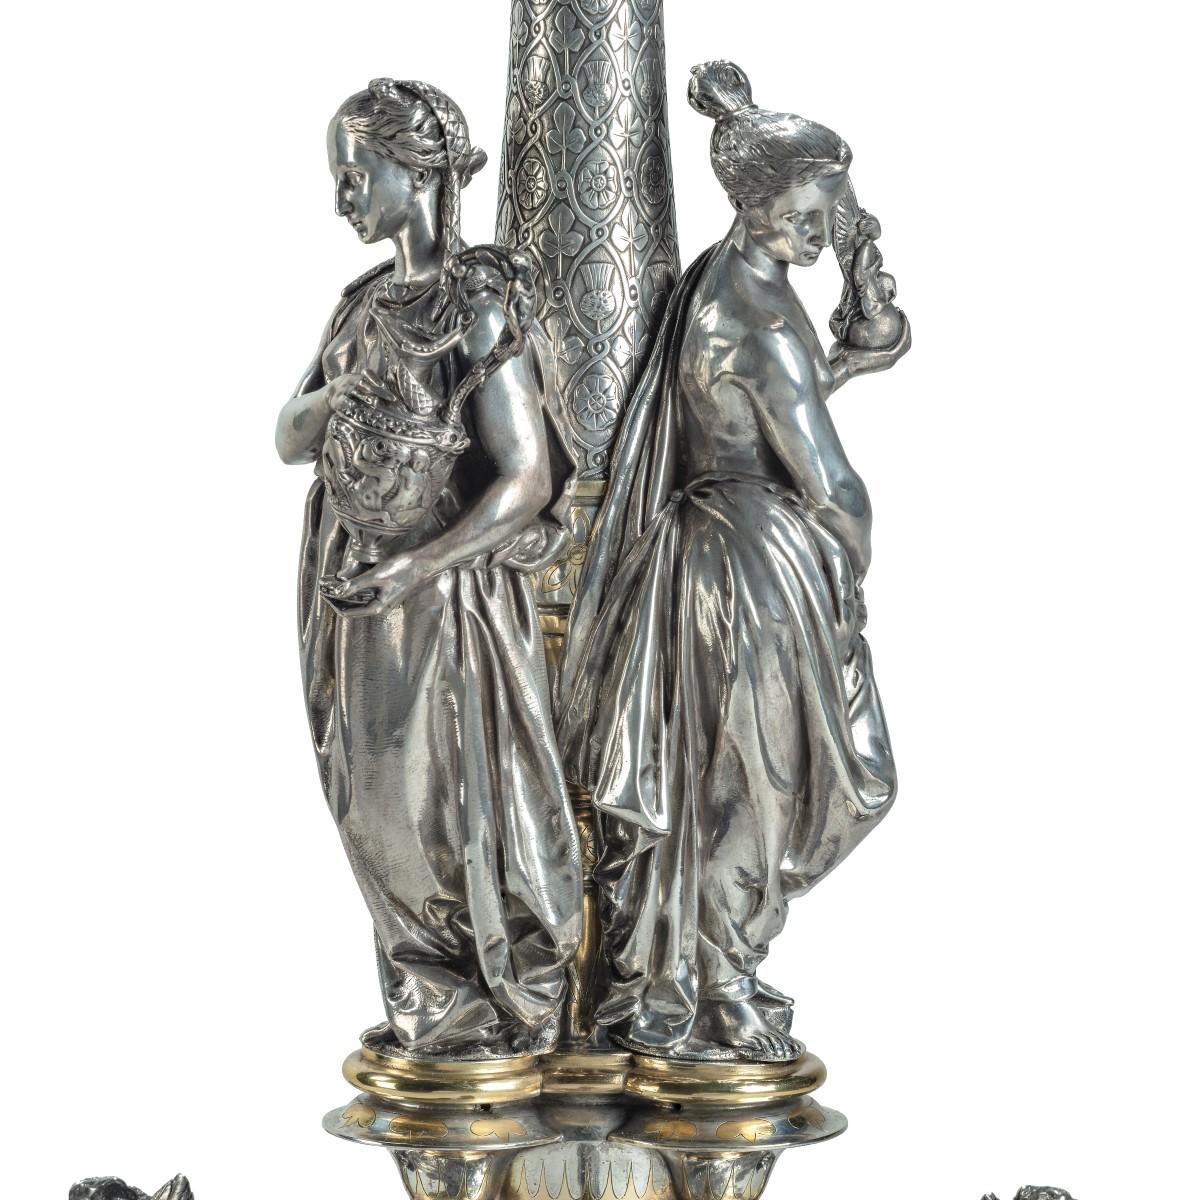 A Centrepiece Presented to Thomas Fairbairn for Organising the 1857 Manchester Art Treasures Exhibition